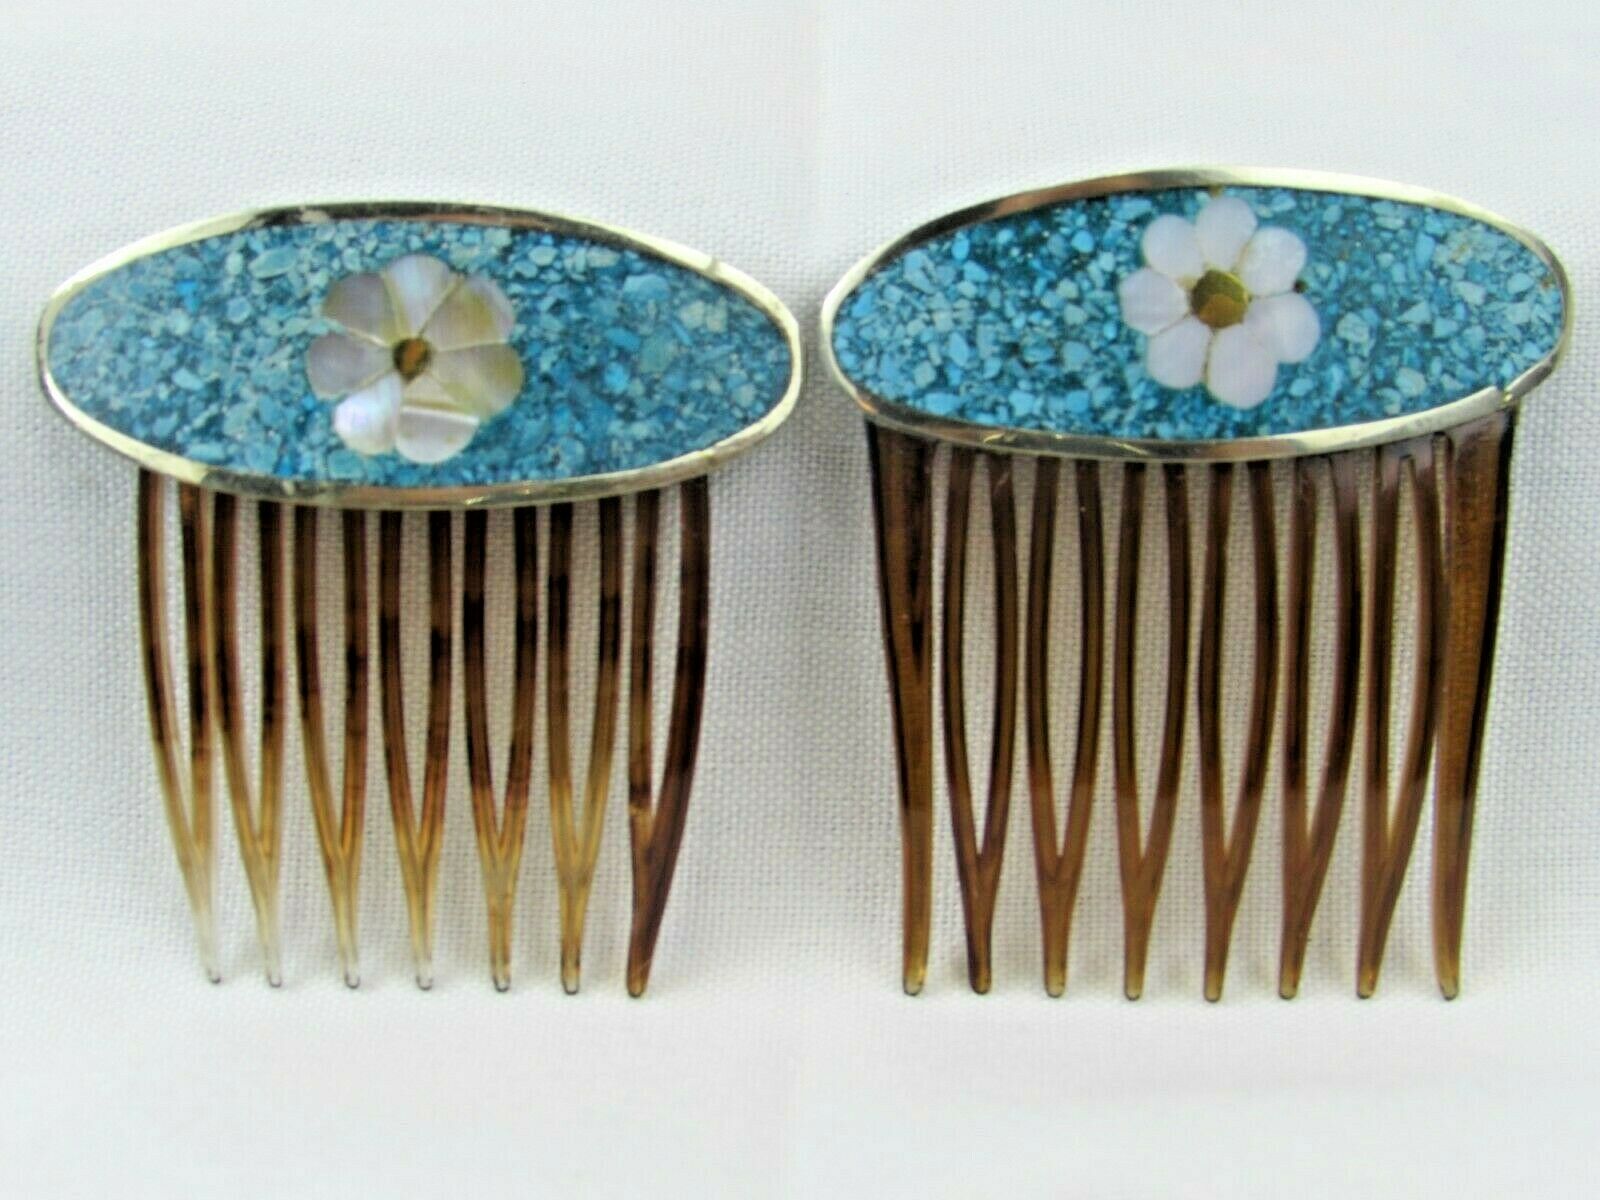 2x Mexico Alpaca Vintage Hair Clips Mother Of Pearl Crushed Turquoise Abalone